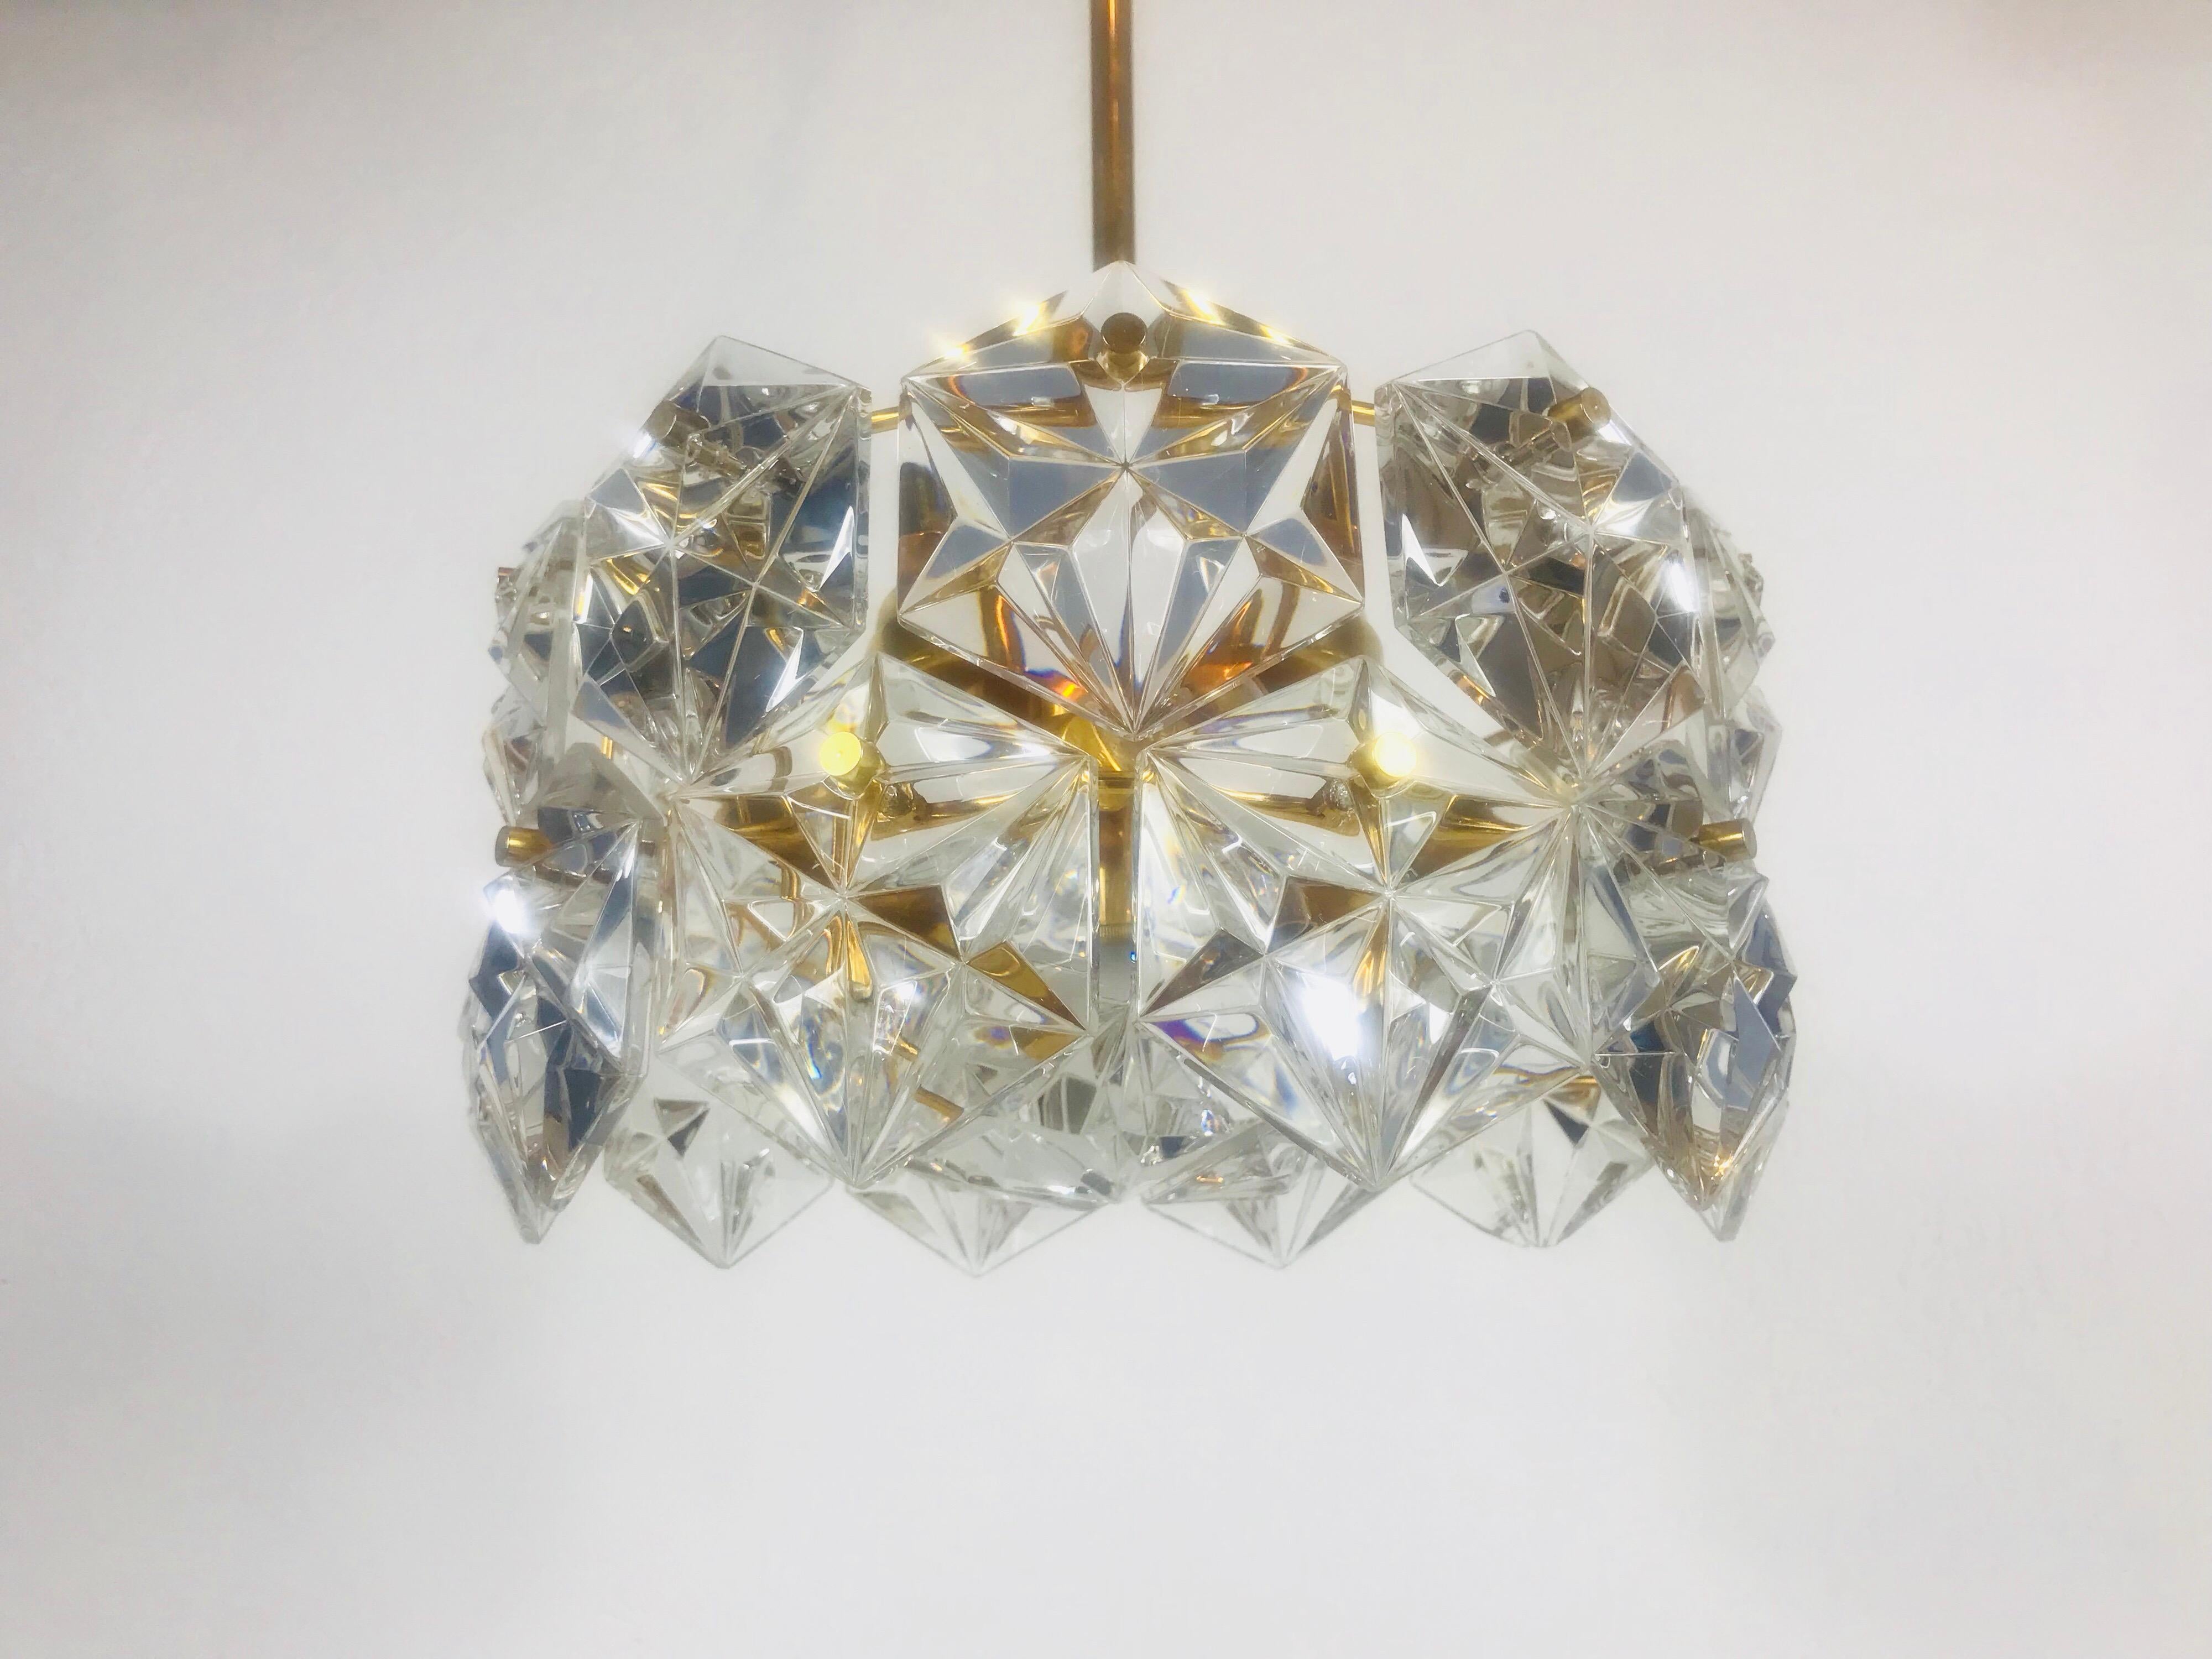 Kinkeldey Midcentury Polished Brass and Crystal Glass Chandelier, circa 1960s In Good Condition For Sale In Hagenbach, DE